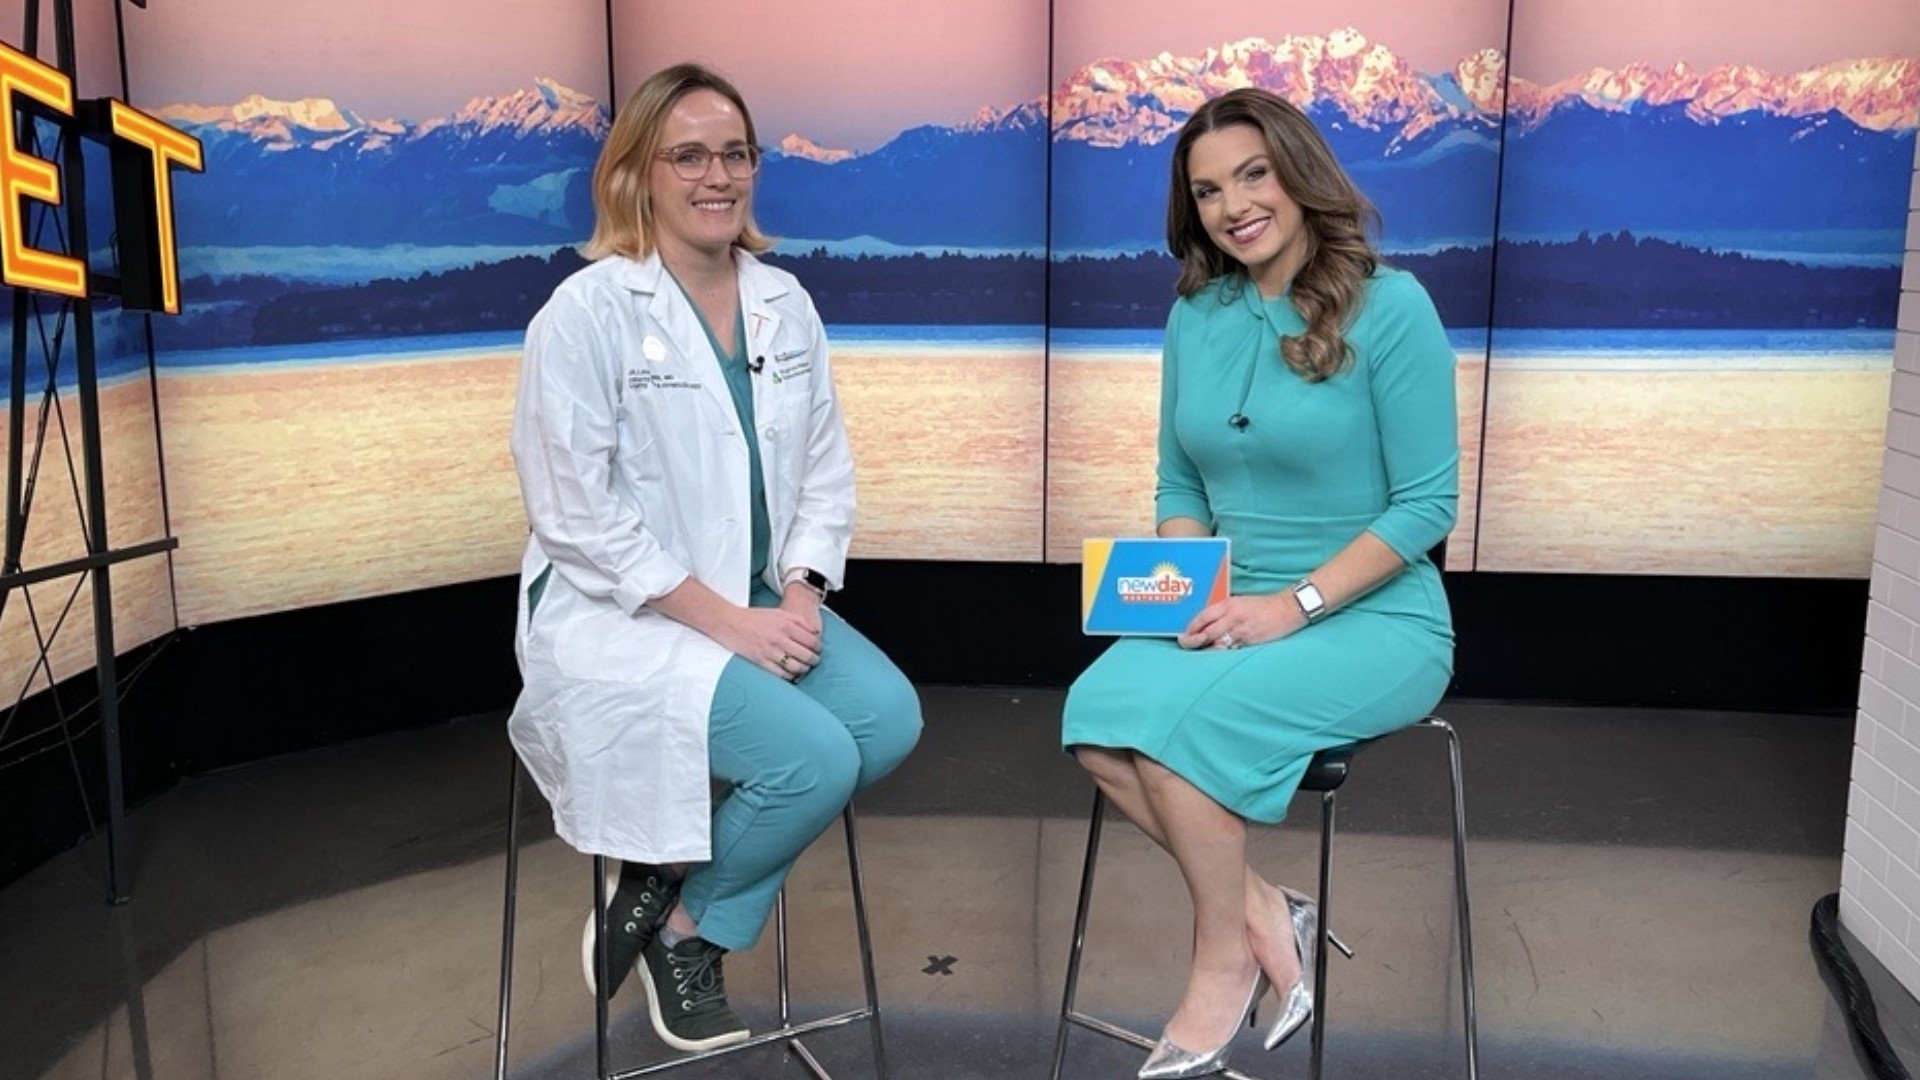 From puberty to reproduction to menopause – here’s what women need to know. Sponsored by Virginia Mason Franciscan Health.